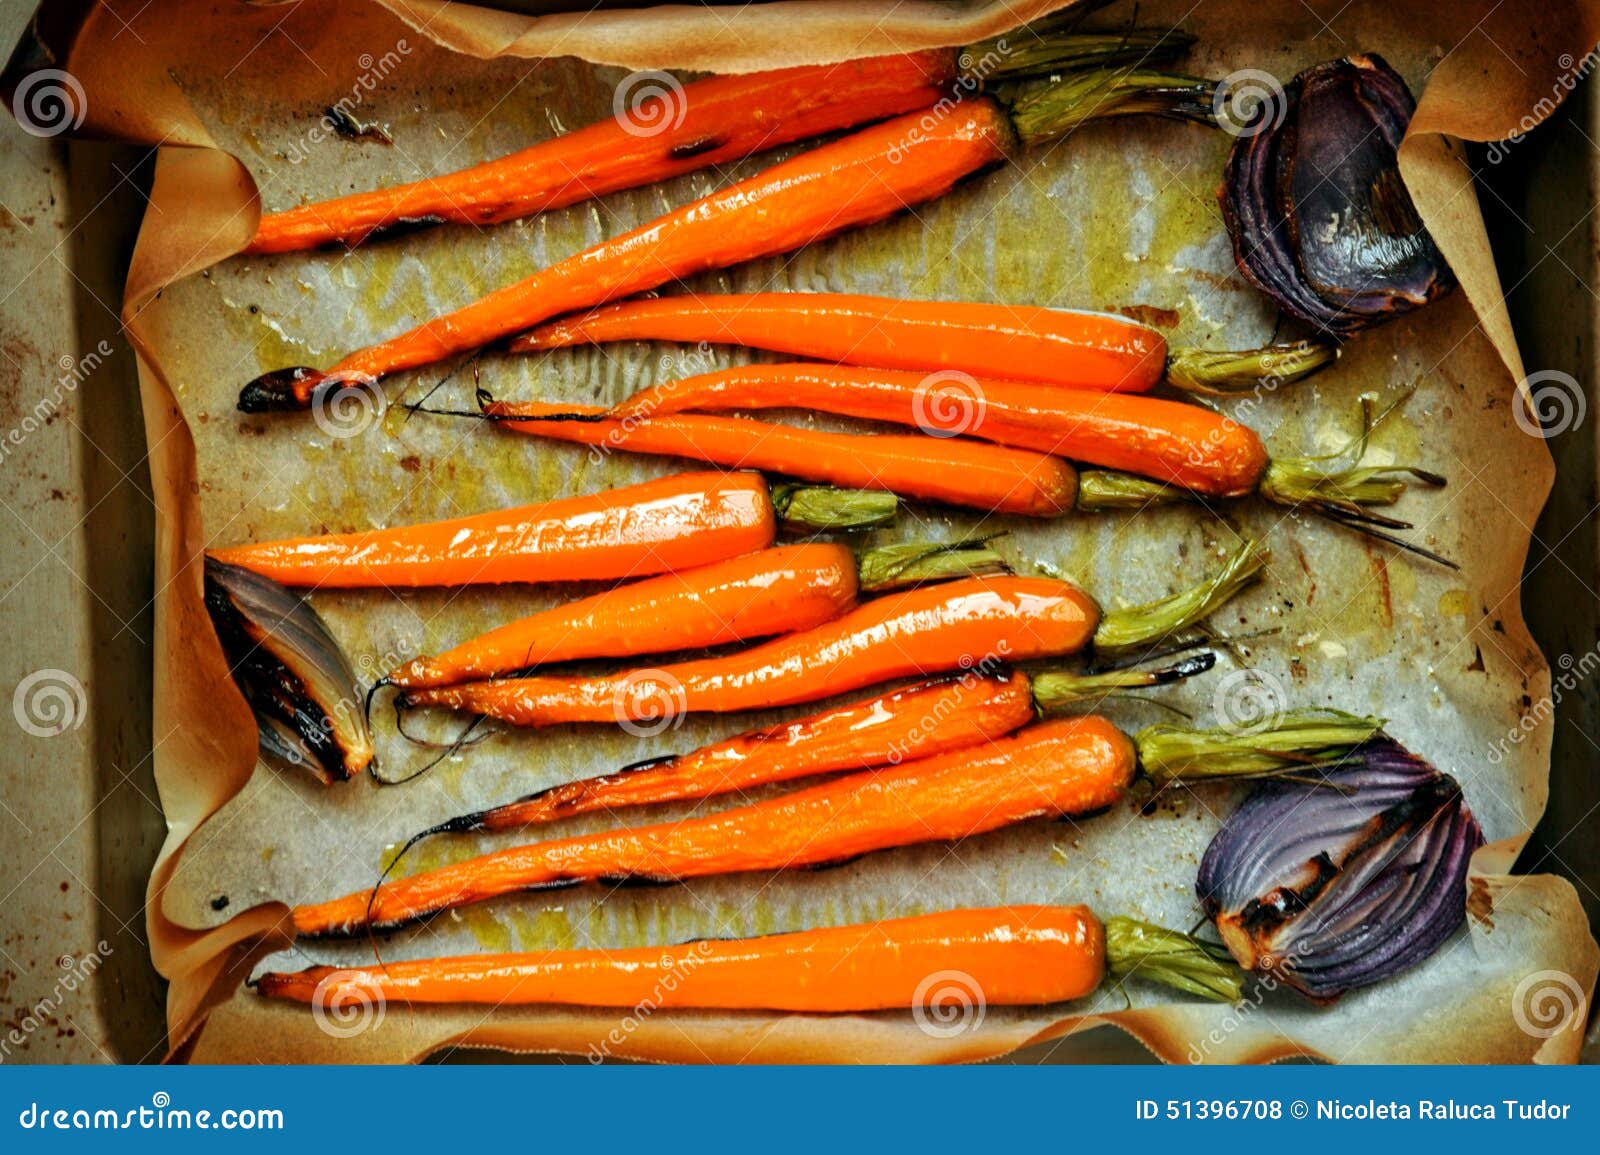 vegan food with carrots and onion grilled in the oven